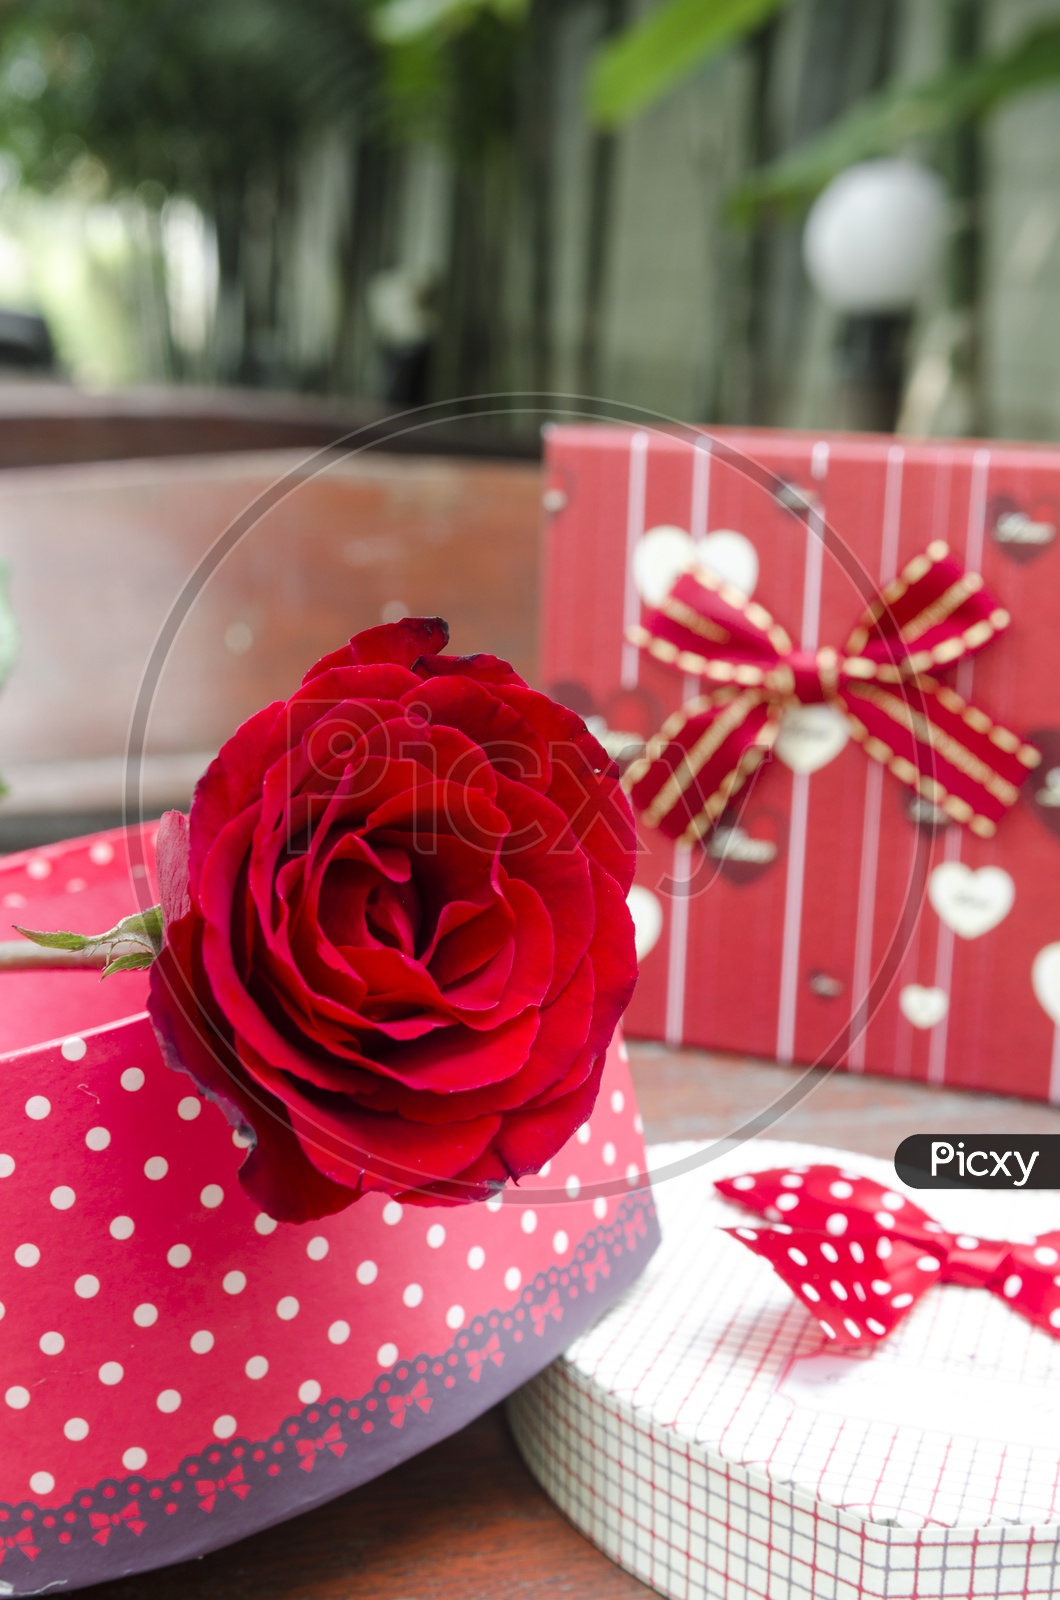 Valentine's Day Template Or  Background  With Red Rose And Gift Box